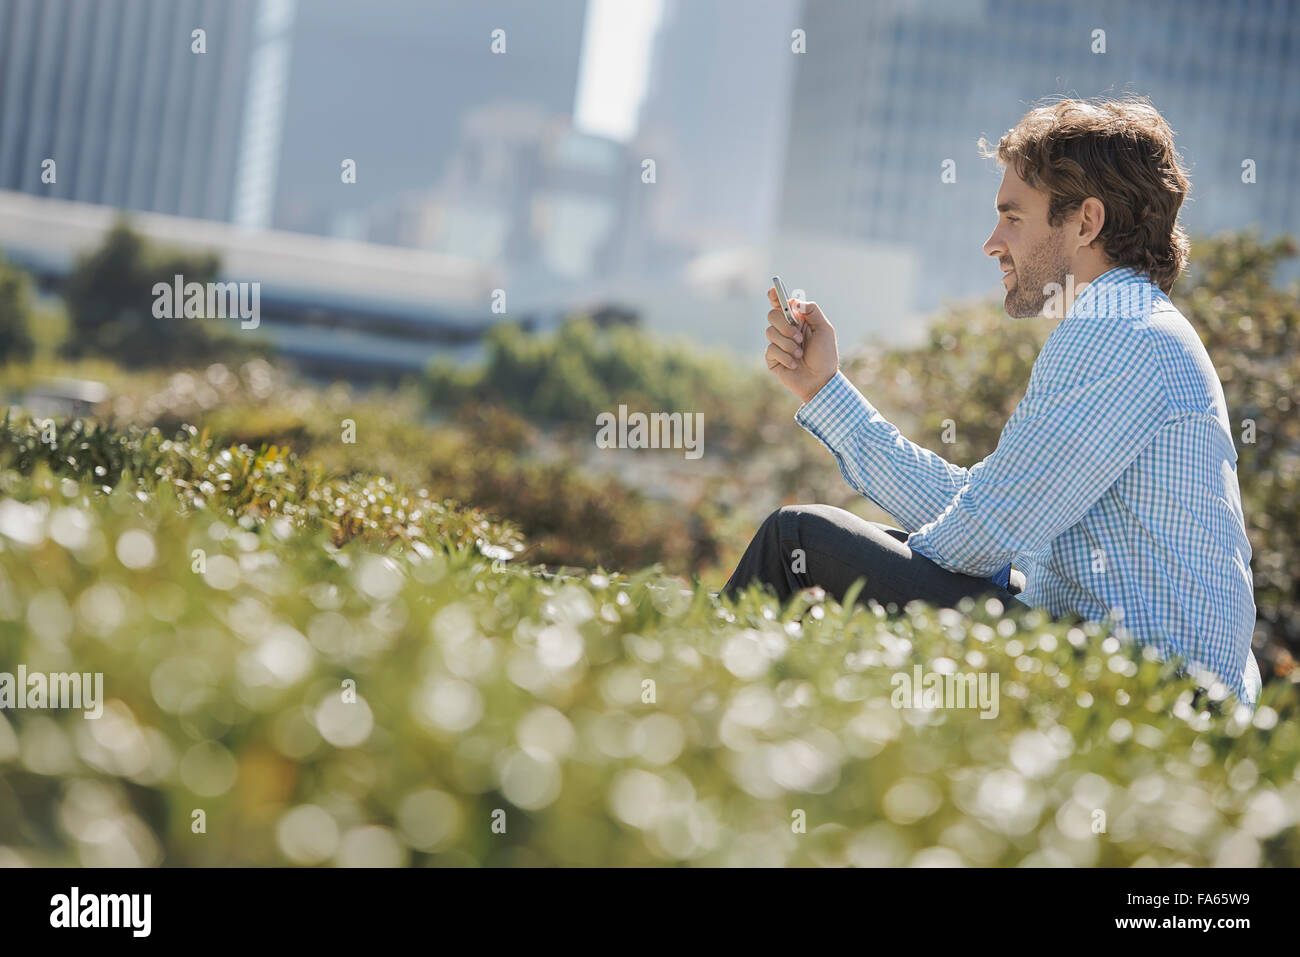 A young man on a park bench in the city, using a cell phone. Stock Photo